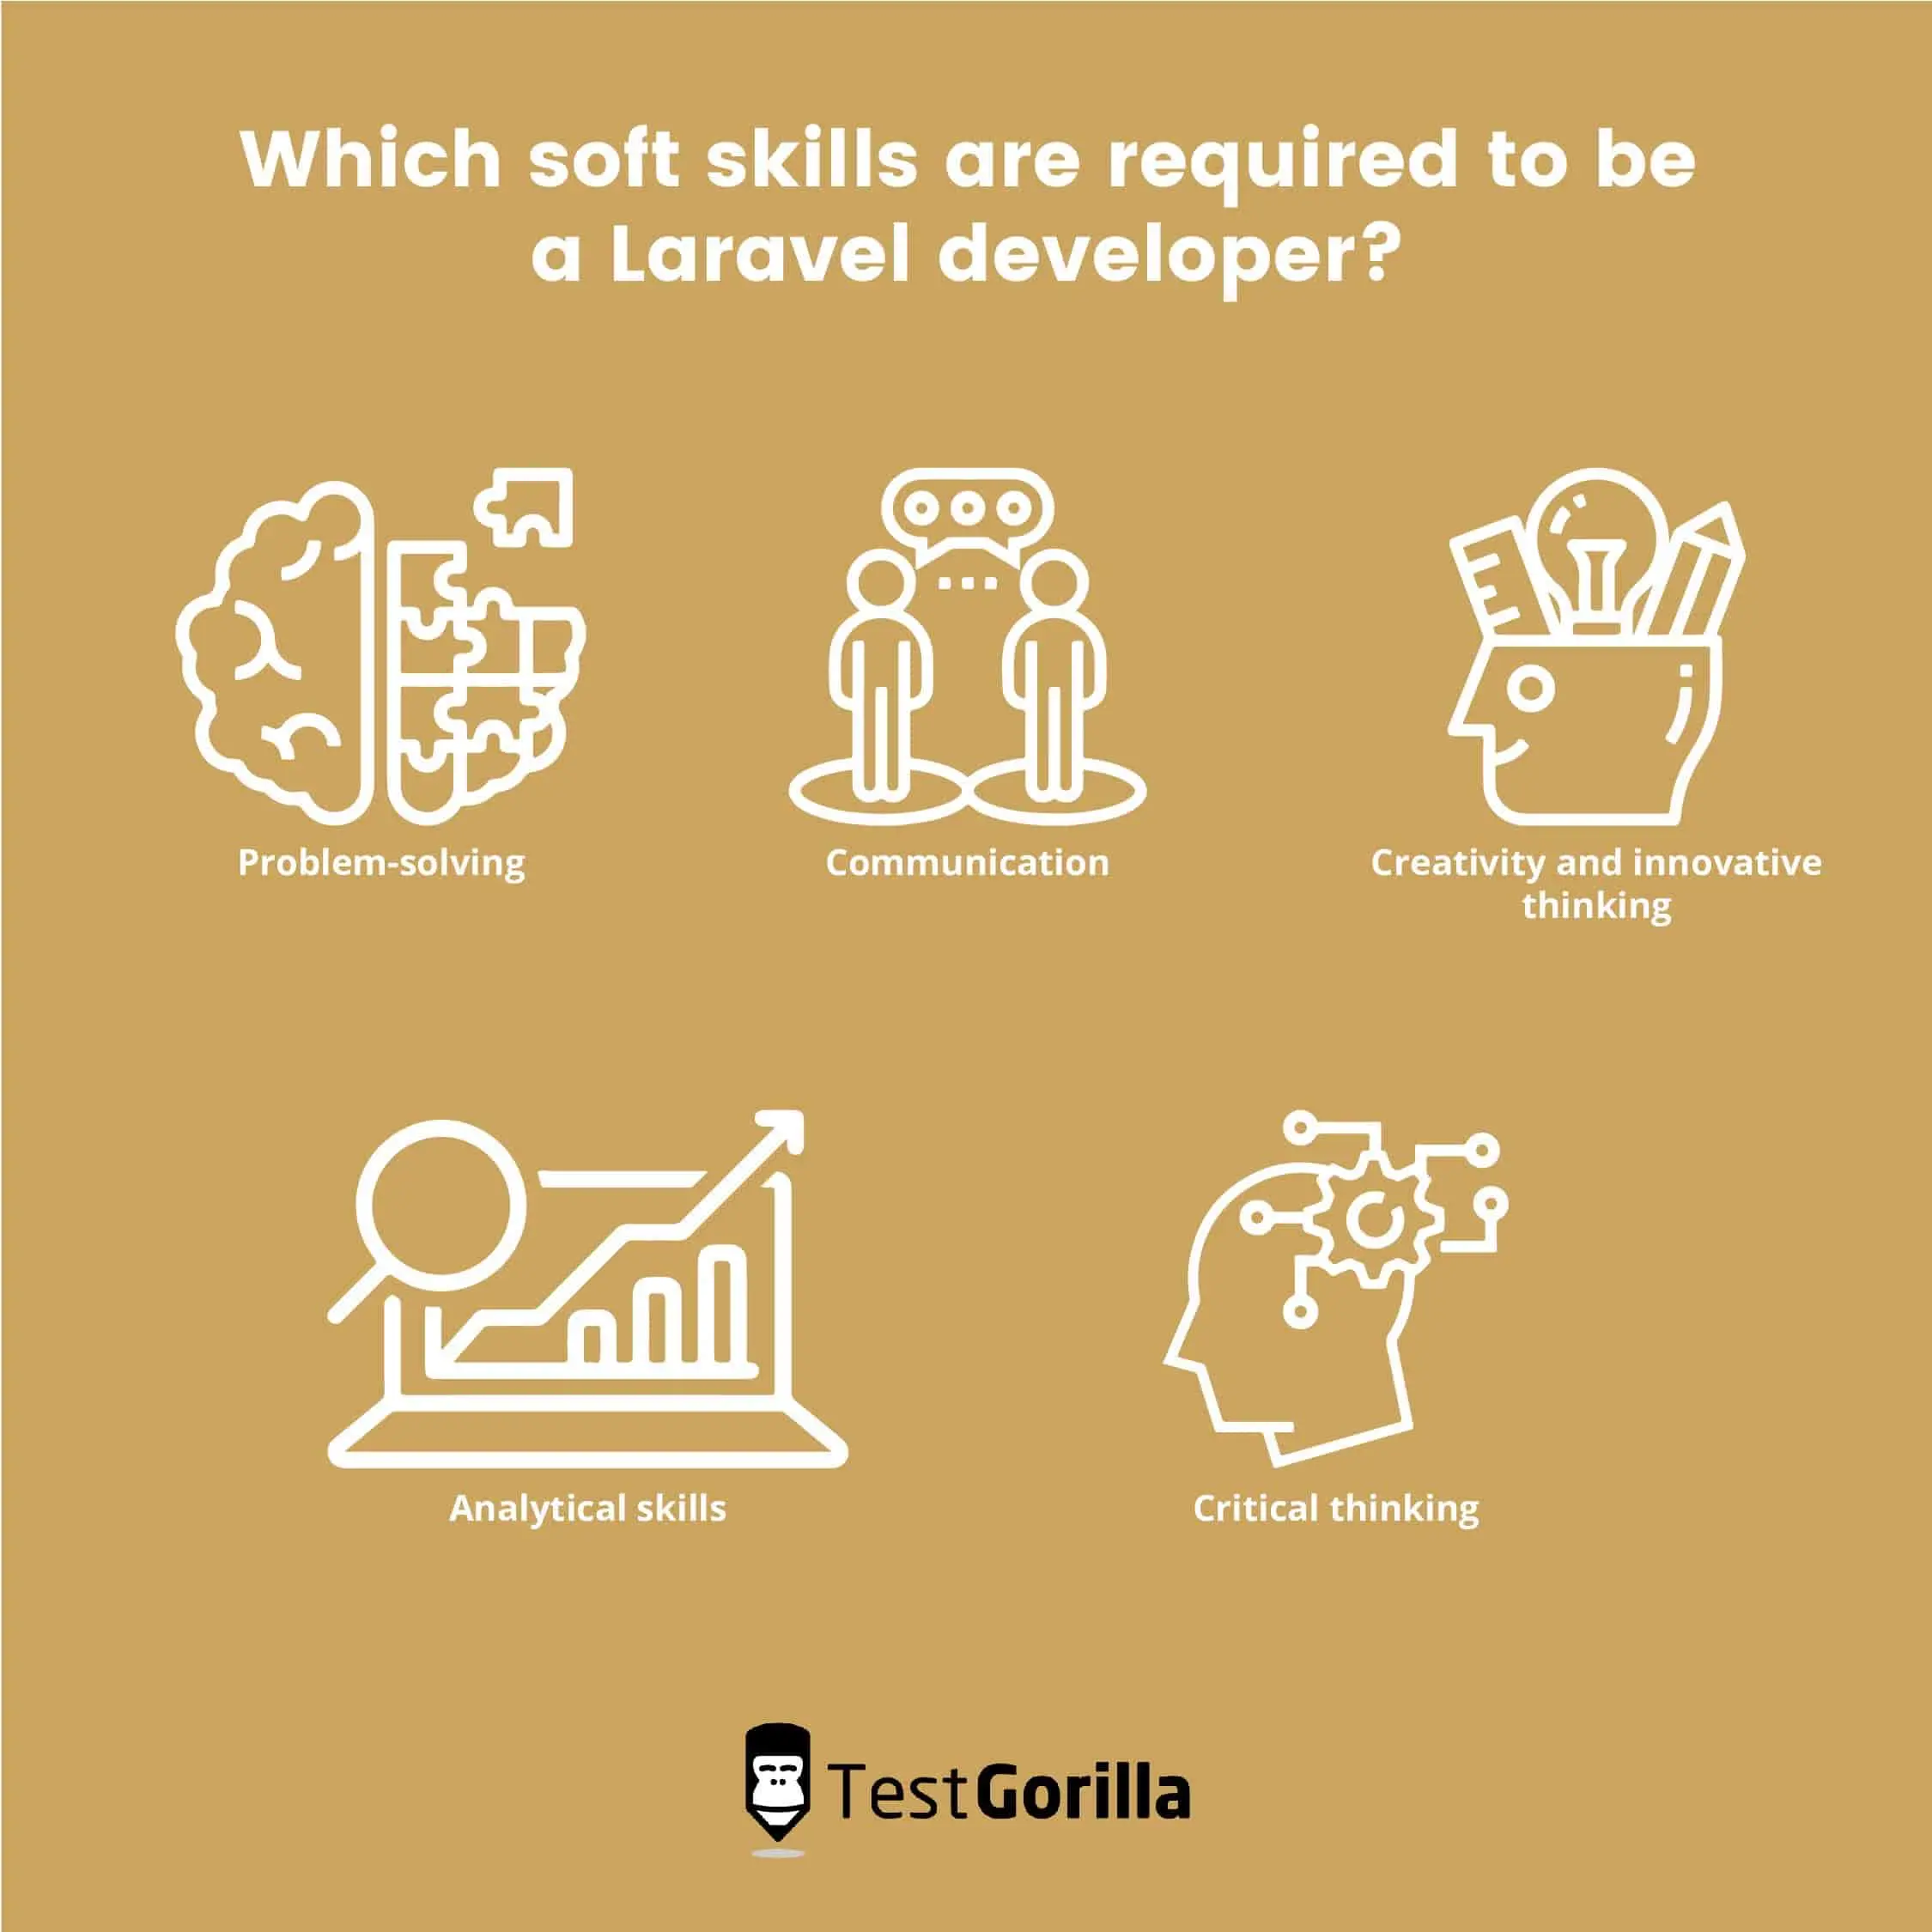 image showing soft skills required to be a Laravel developer